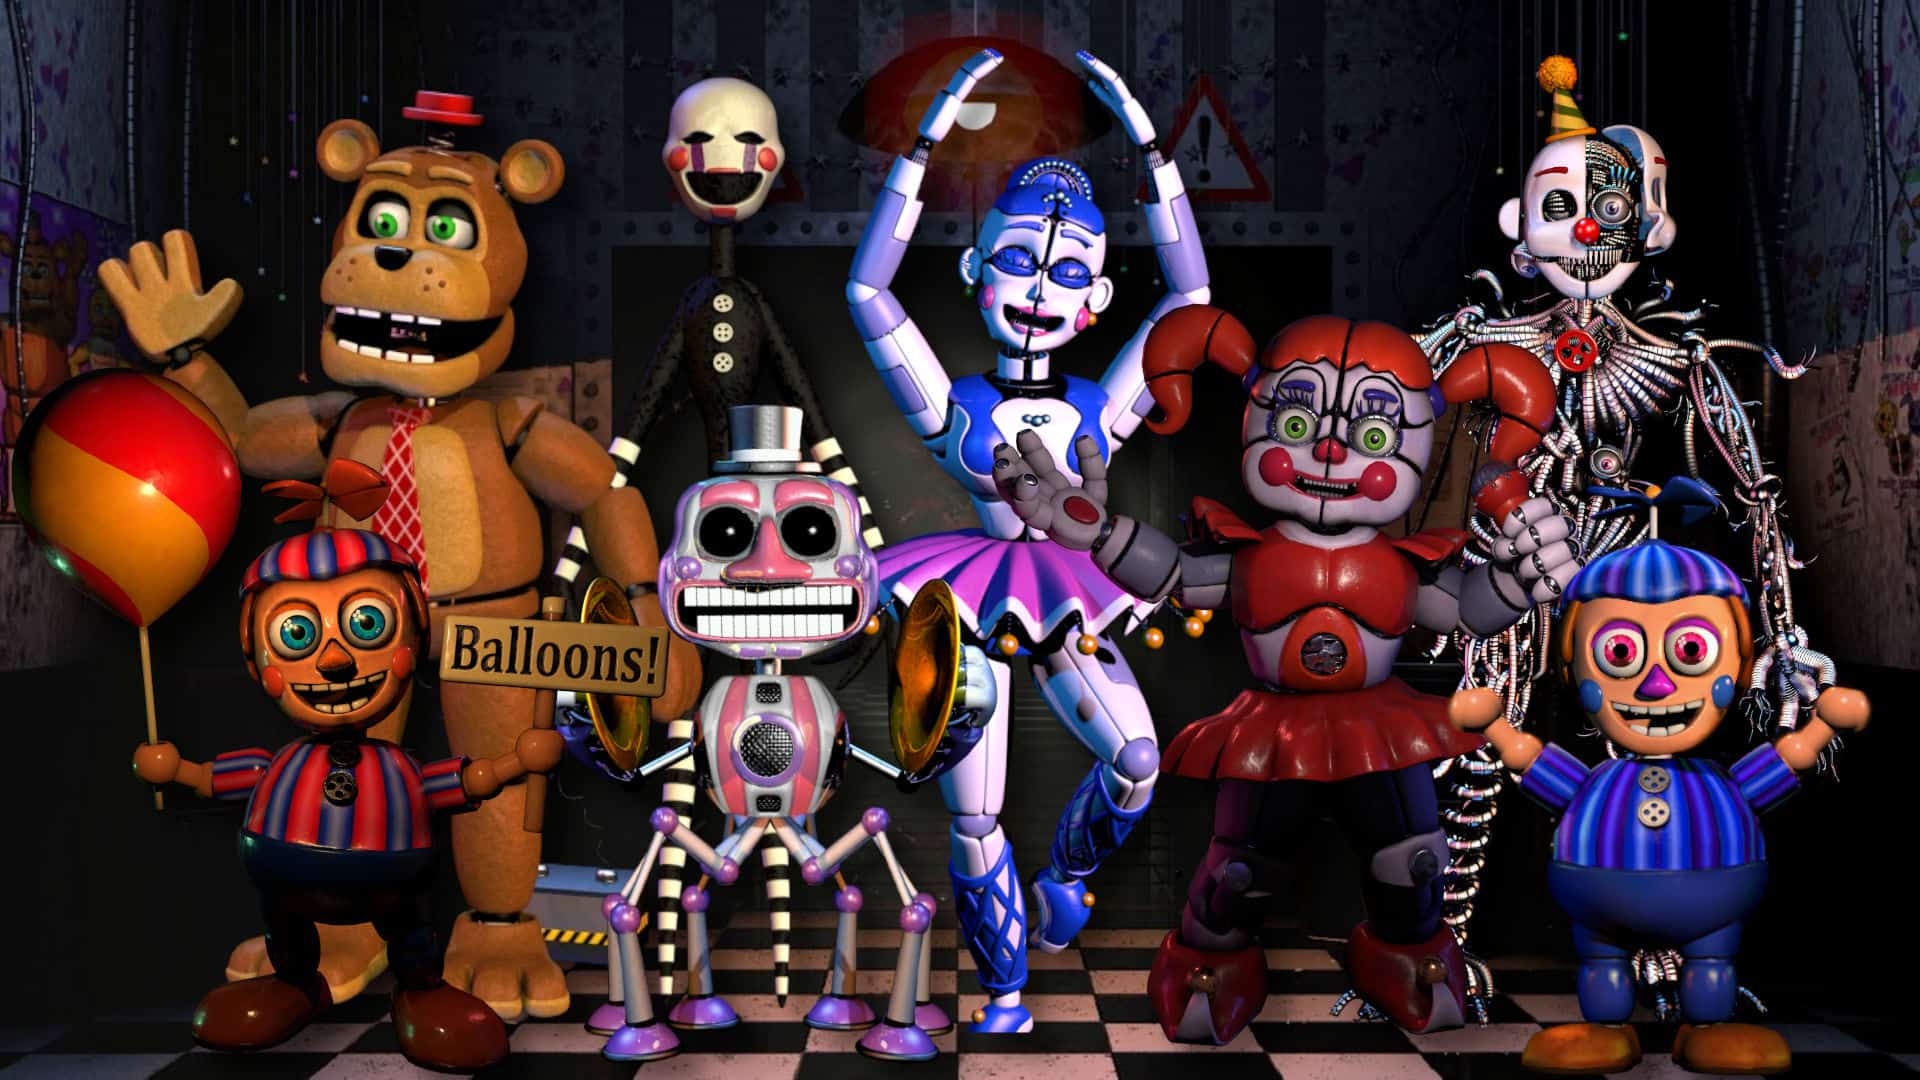 All Five Nights At Freddy's (FNAF): Security Breach Characters in 2022 -  